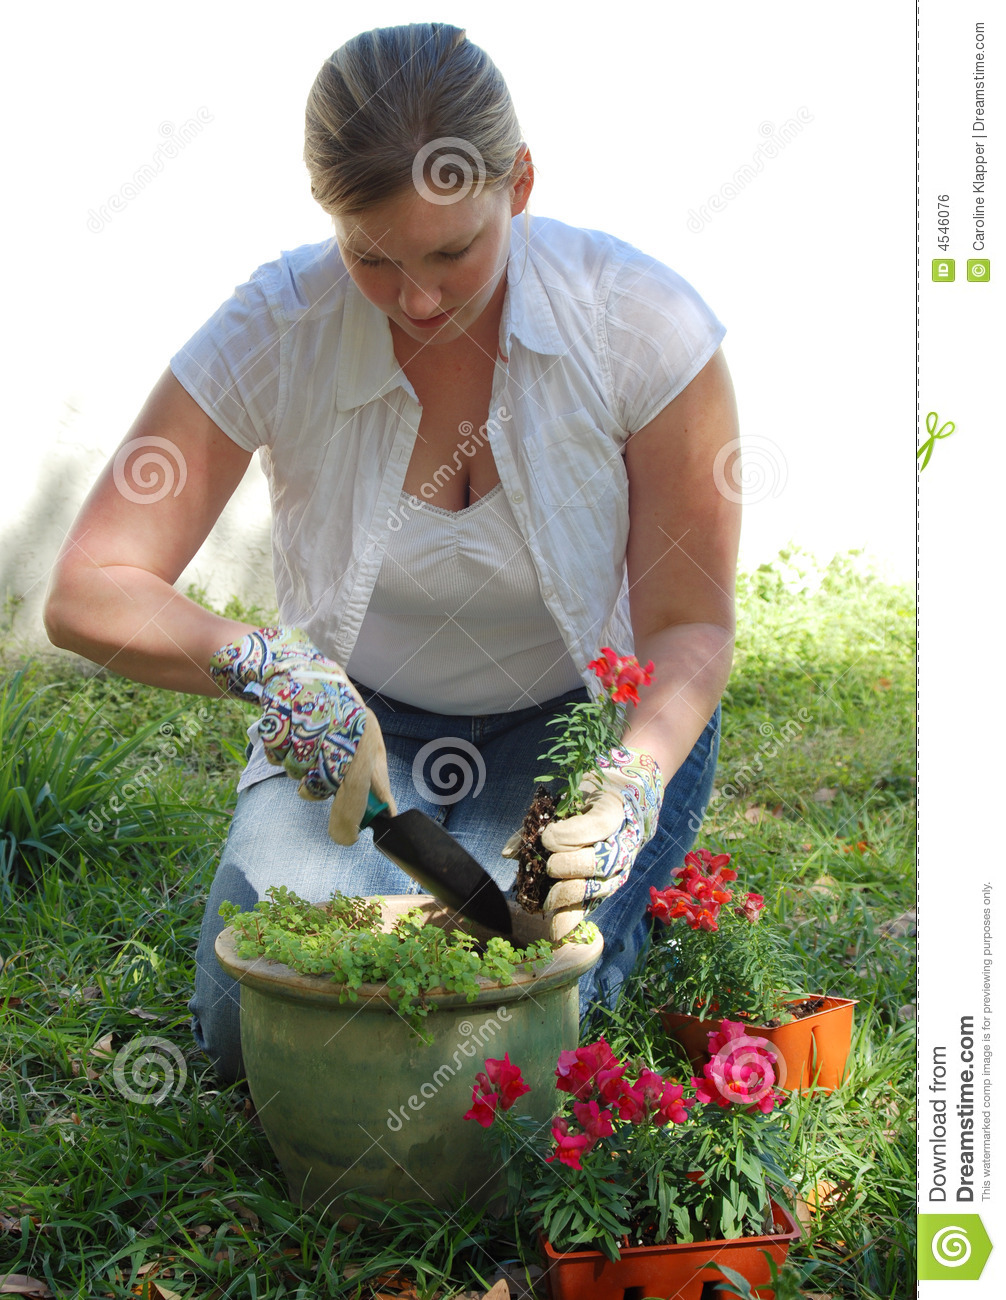 Woman Planting Flowers Royalty Free Stock Image   Image  4546076